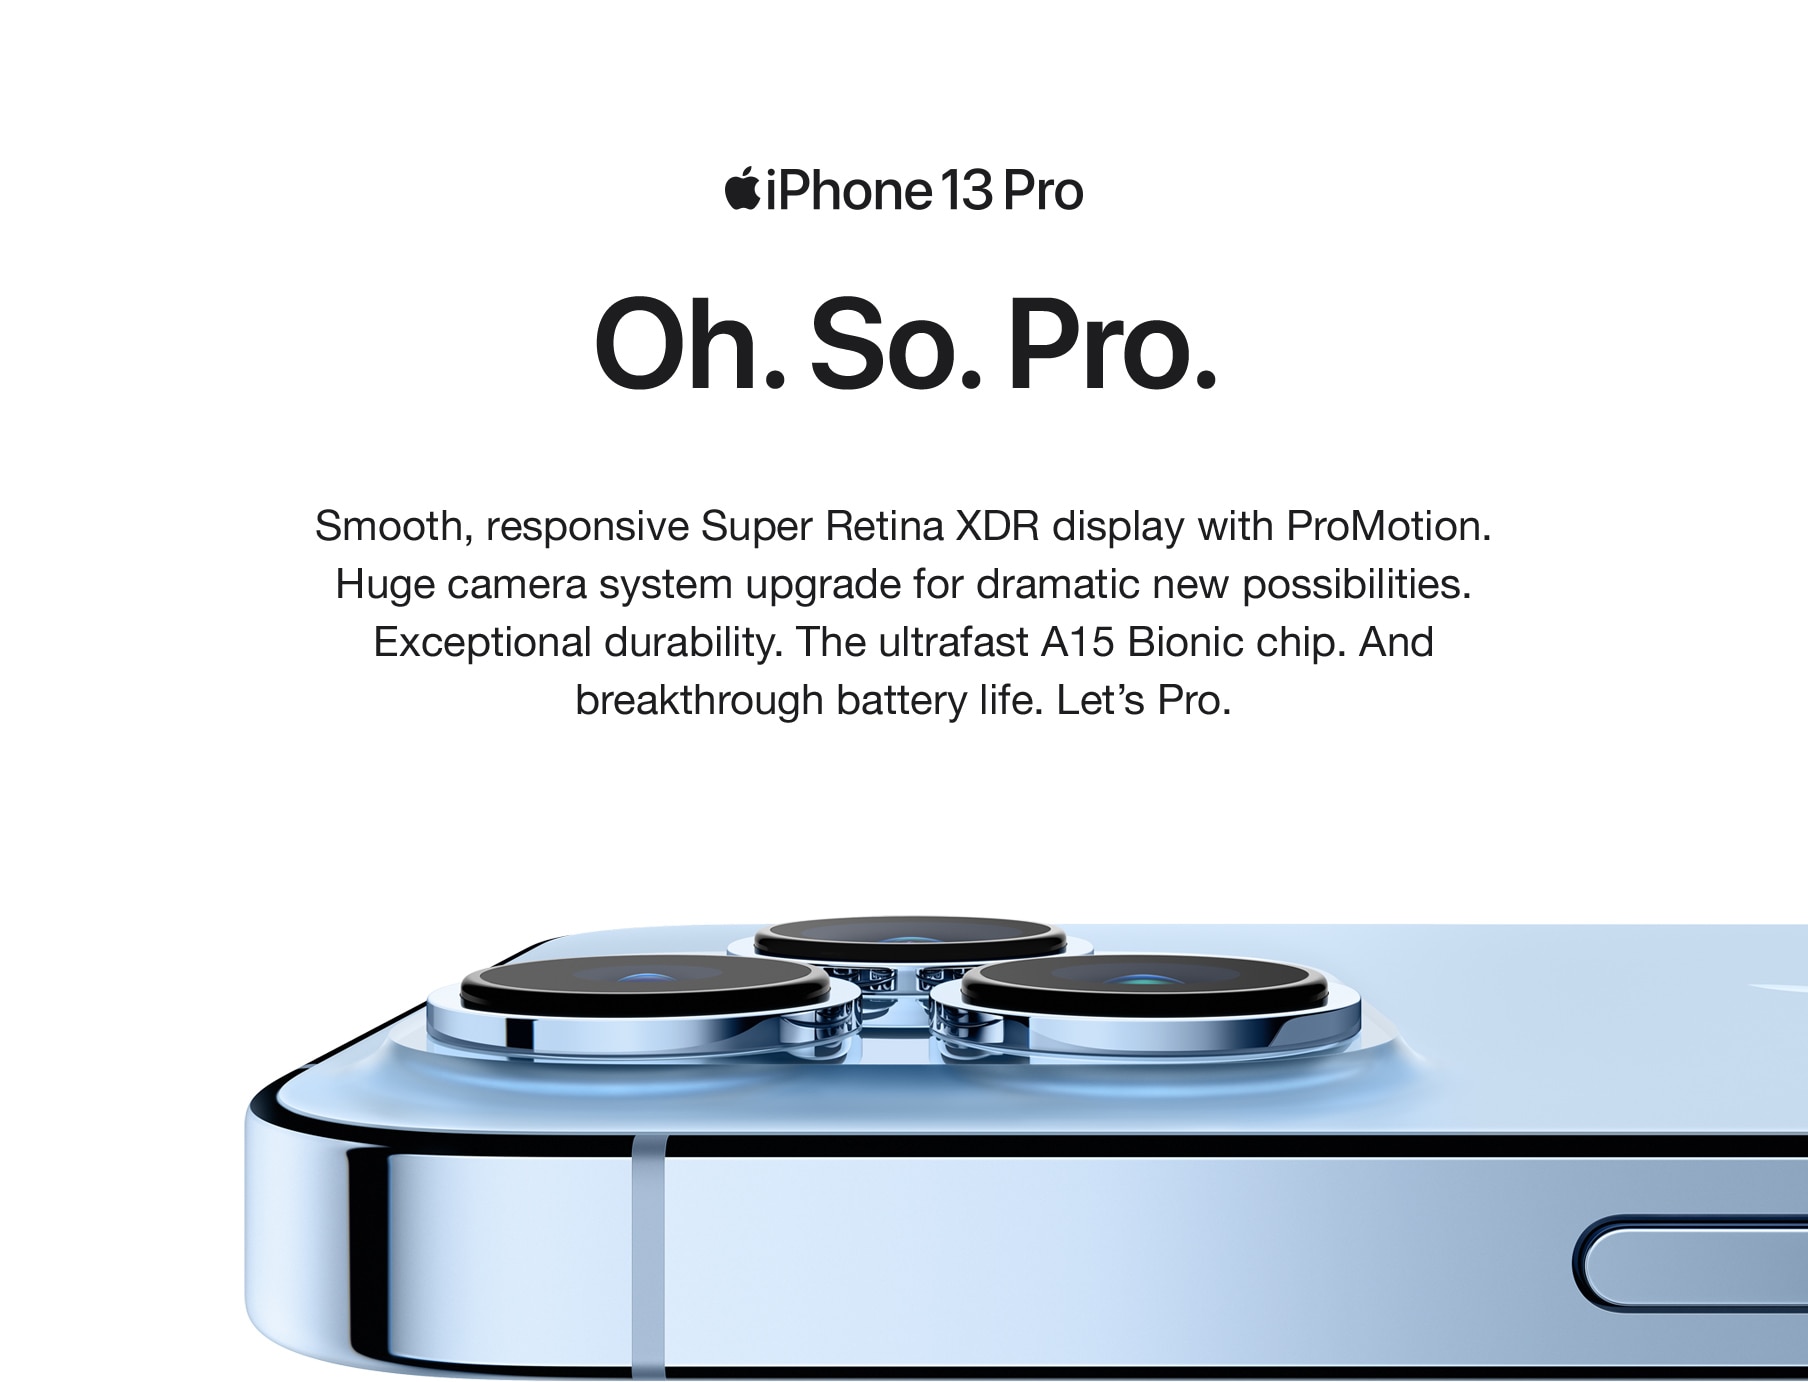 iPhone 13 Pro. Oh. So. Pro. Smooth, responsive Super Retina XDR display with ProMotion. Huge camera system upgrade for dramatic new possibilities. Exceptional durability. The ultrafast A15 Bionic chip. And breakthrough battery life. Let's Pro.